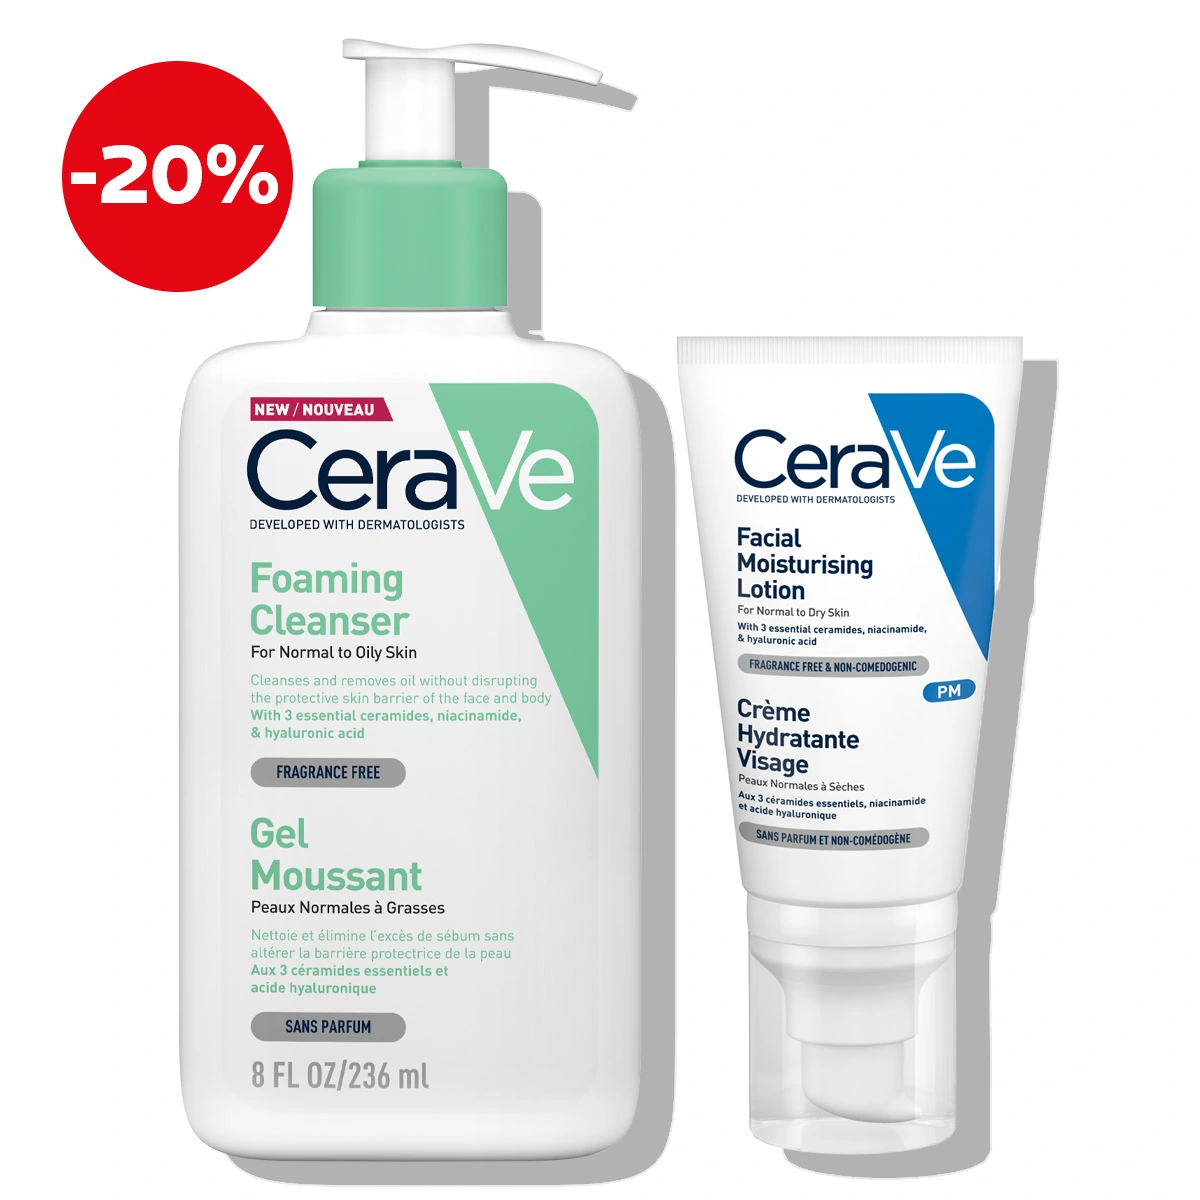 CeraVe-Daily-Face-Care-Protocol-For-Normal-to-Combination-Skin-_Cleansing-And-Care_-_1_